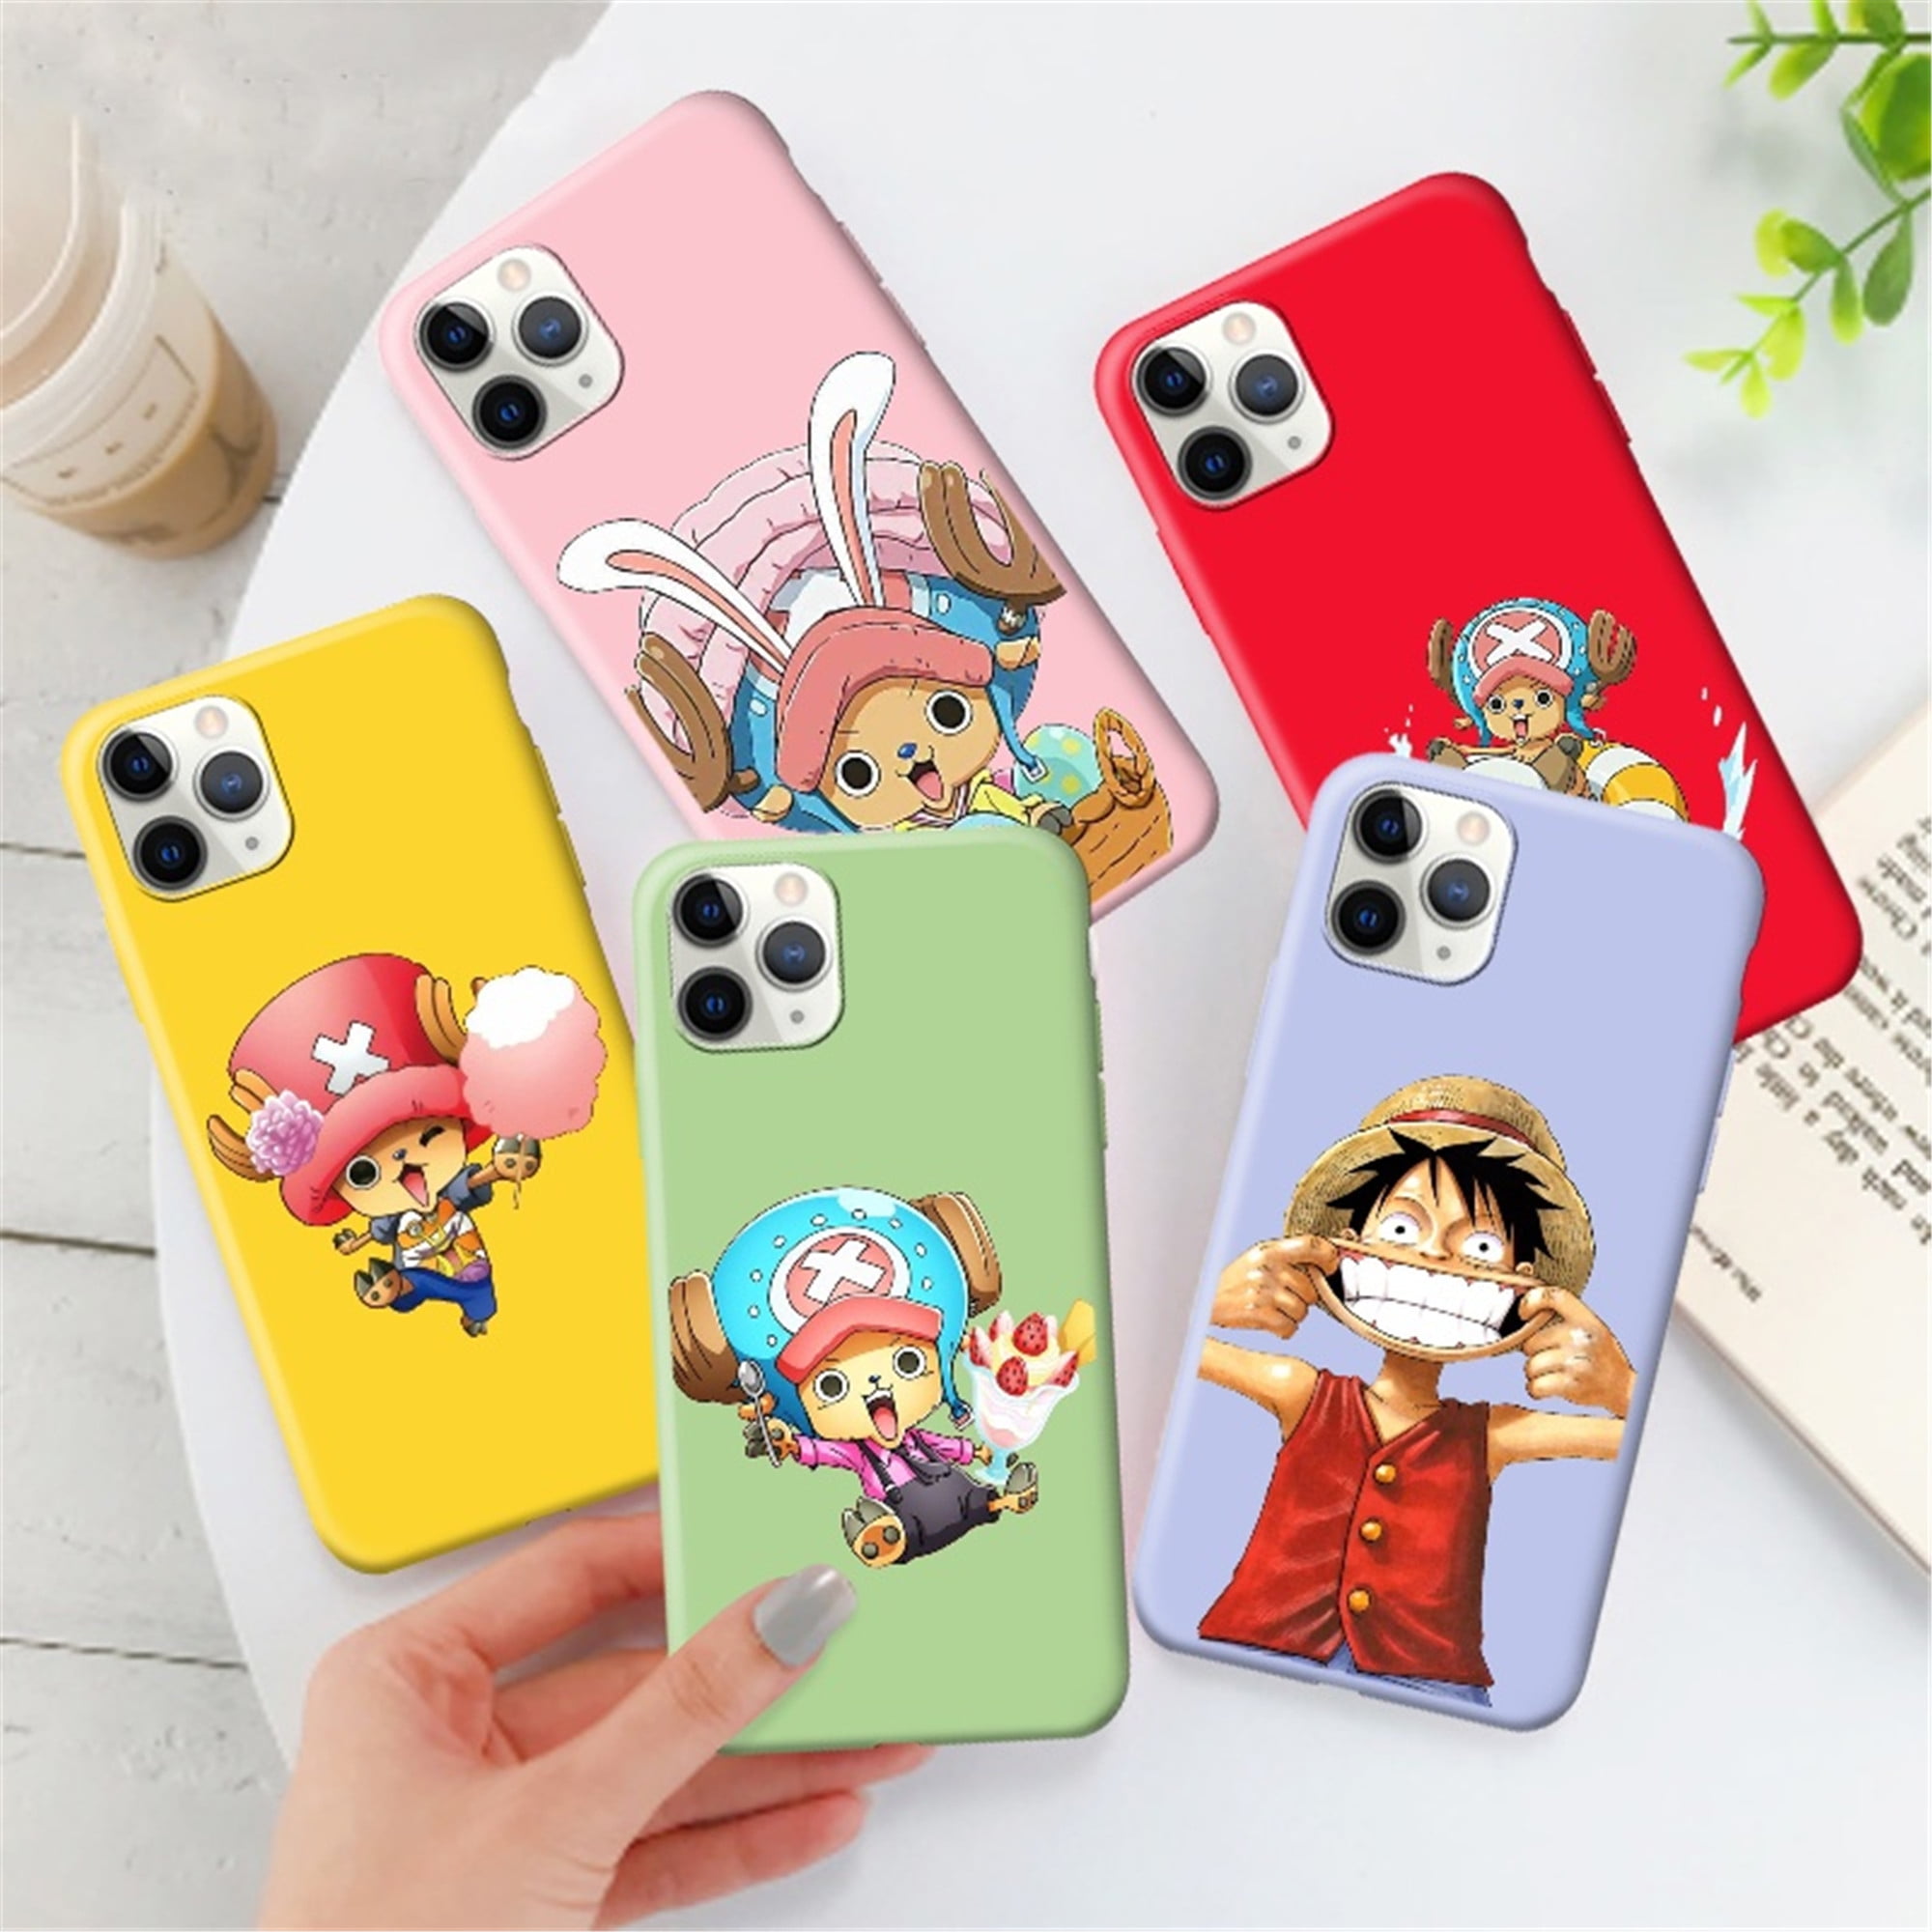 For Iphone 11 Pro Max Case Anime One Piece Luffy Phone Case For Iphone 11 Pro Max Walmart Com